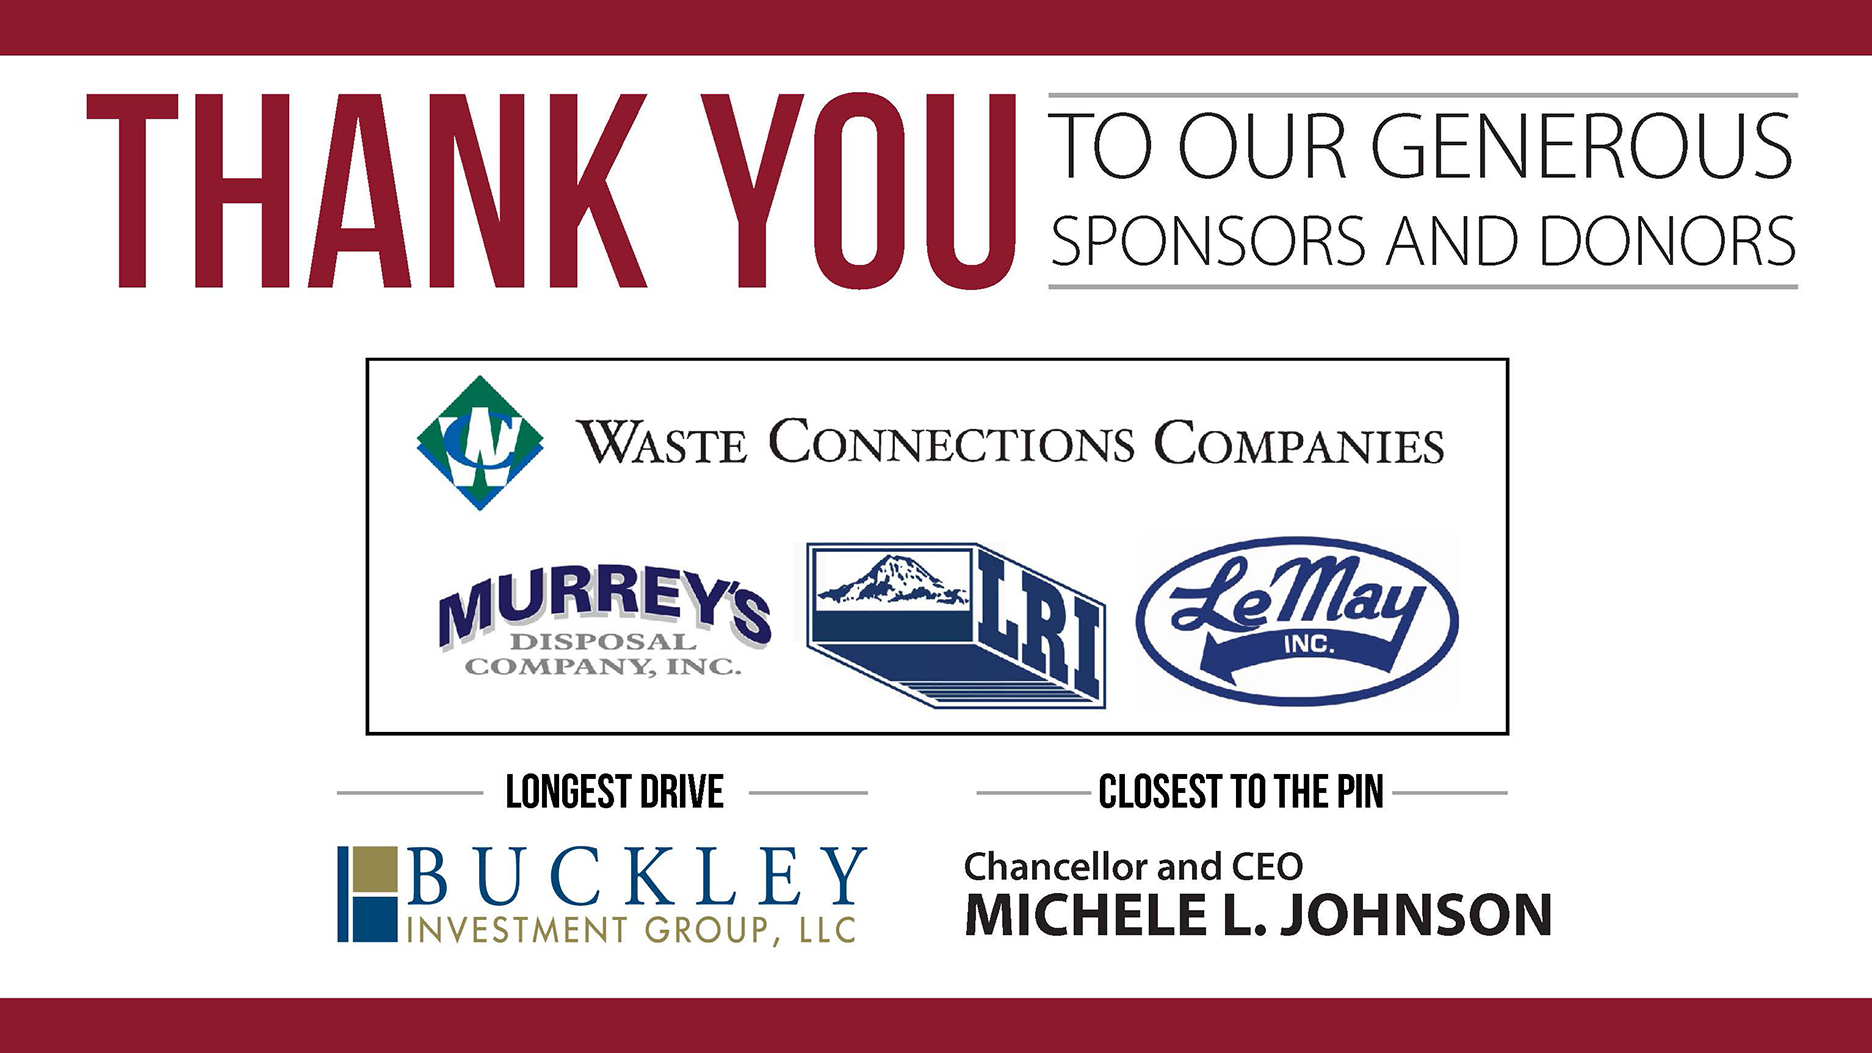 thank you to our generous sponsors and donors Waste Connection Companies, Murrey's Disposal Company, Inc., LRI, and LeMay Inc.; Longest Drive, Buckley Investment Group, LCC and Closest to the Pin, Chancellor and CEO Michele Johnson